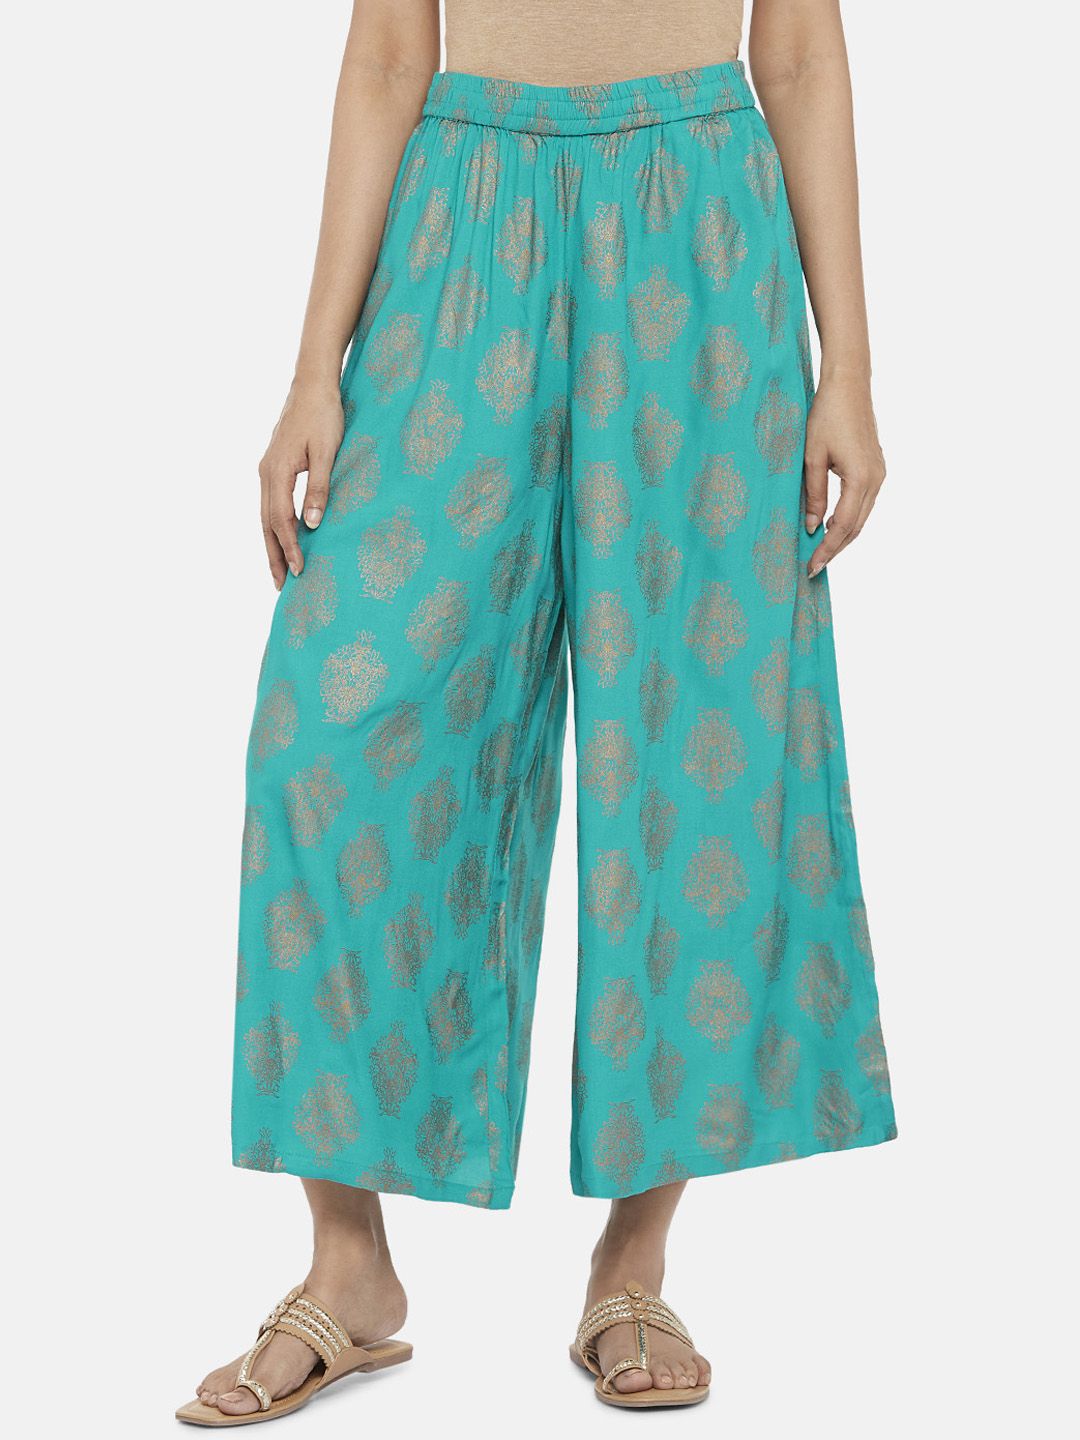 RANGMANCH BY PANTALOONS Women Turquoise Blue & Gold-Toned Printed Flared Palazzos Price in India